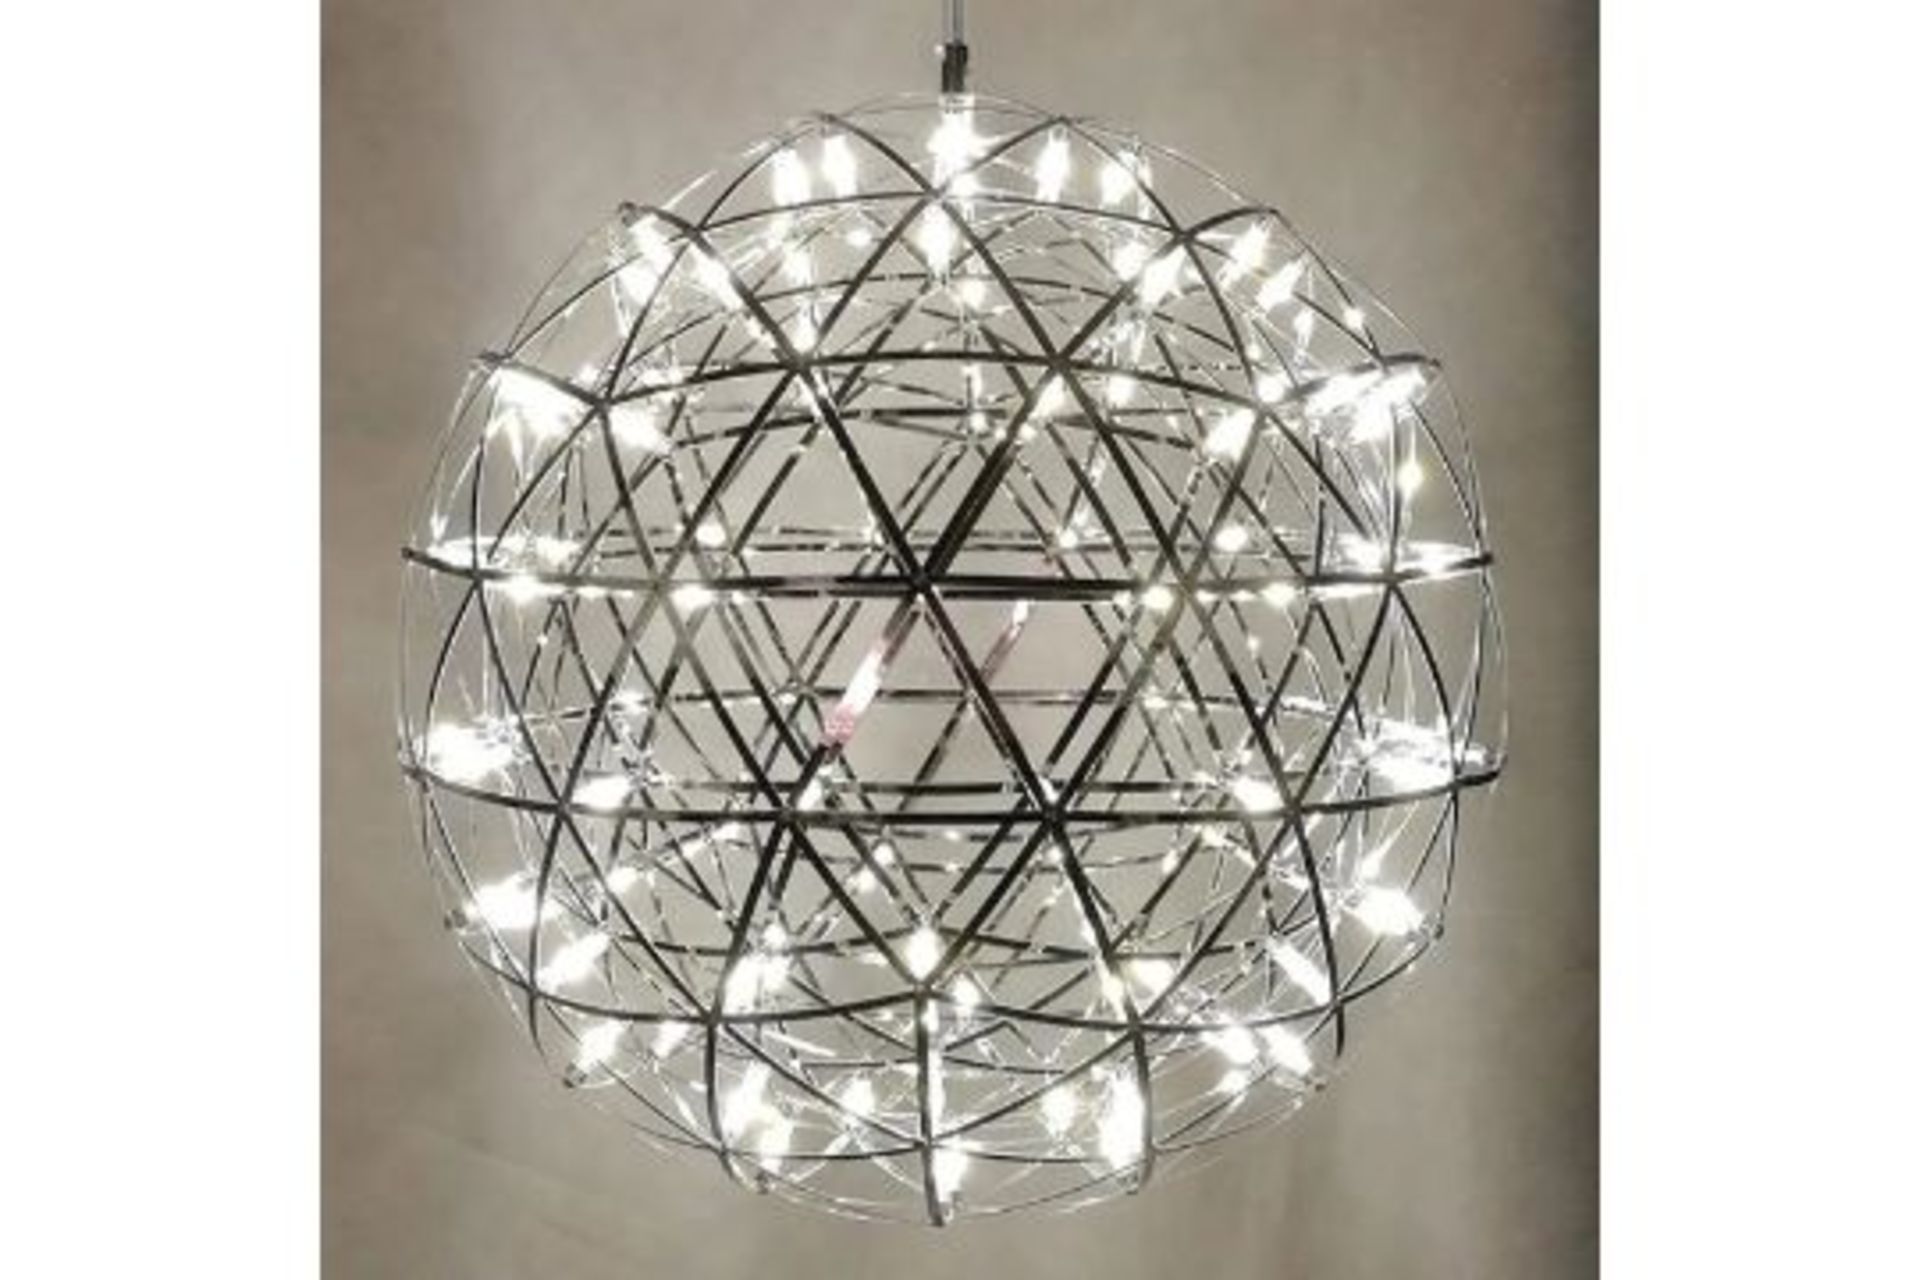 Starburst Hanging Pendant 80cm Diameter x 92 Lights With Its Chrome Bodied Spherical Globe And